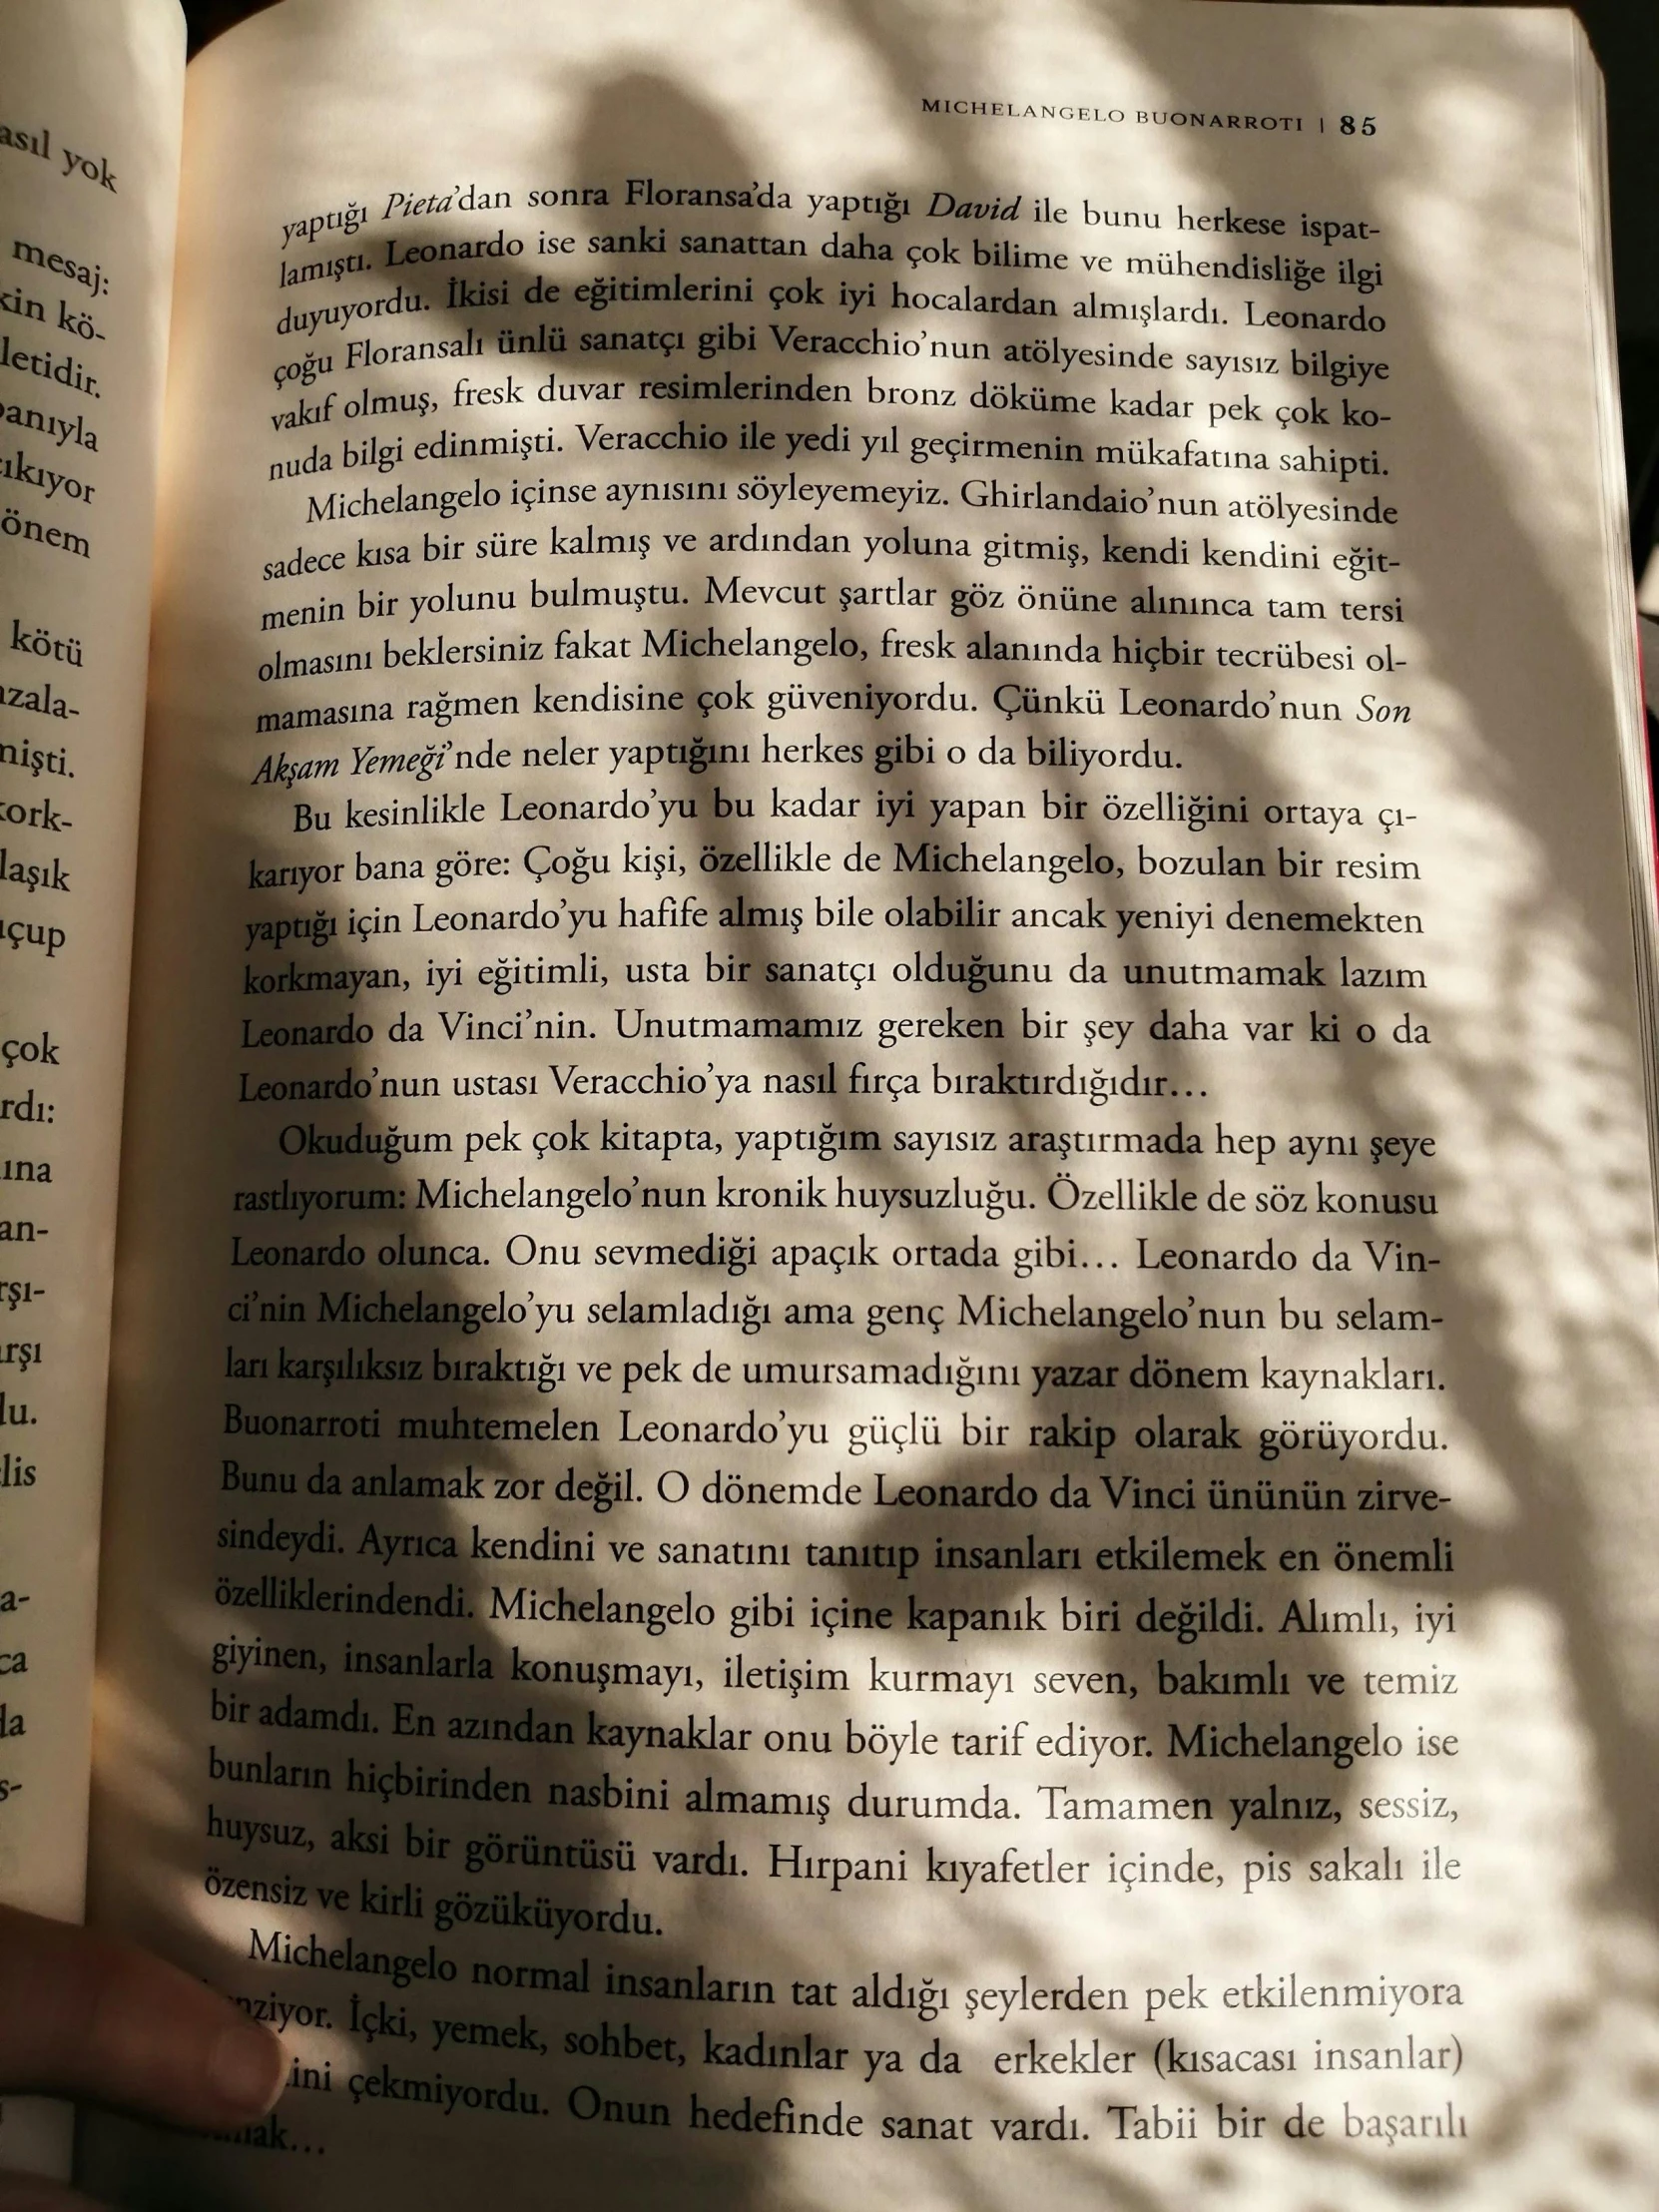 the shadow of a person behind an open book